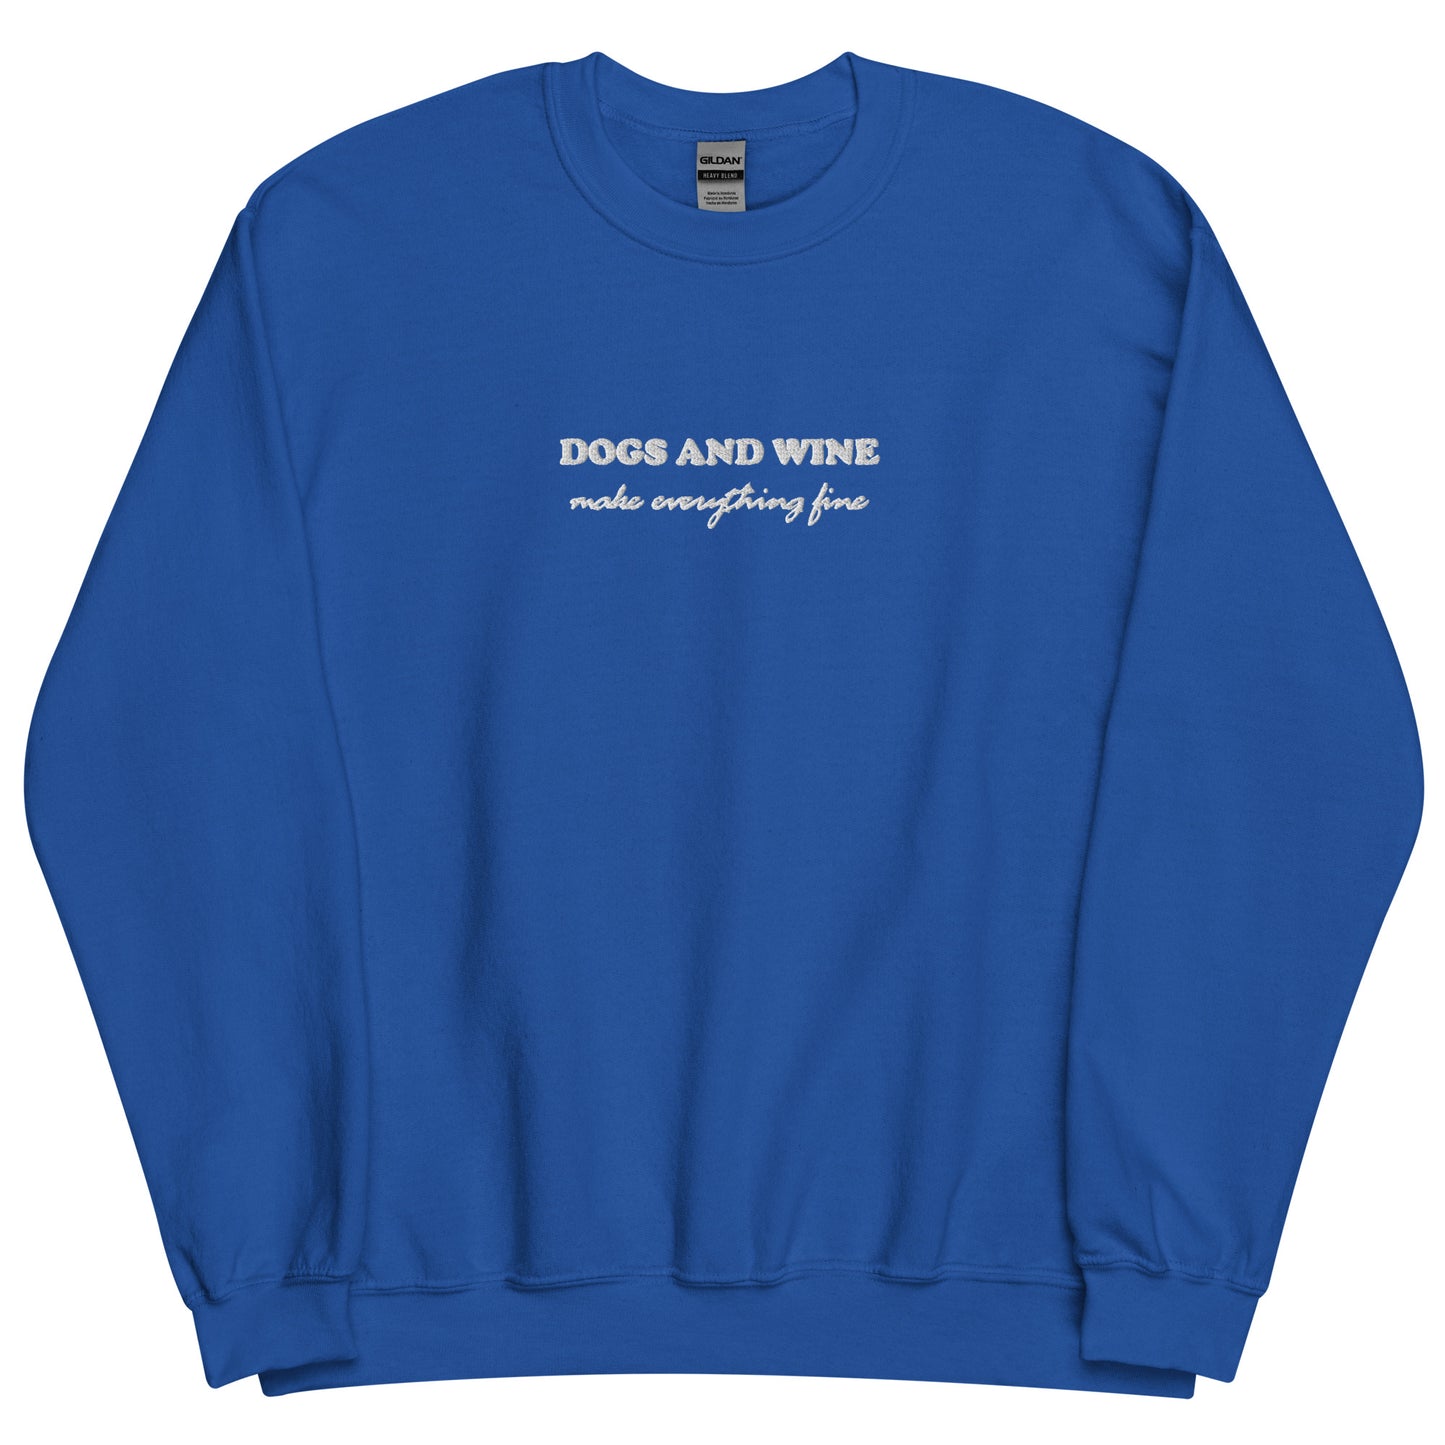 DOGS AND WINE - bestickter Sweater